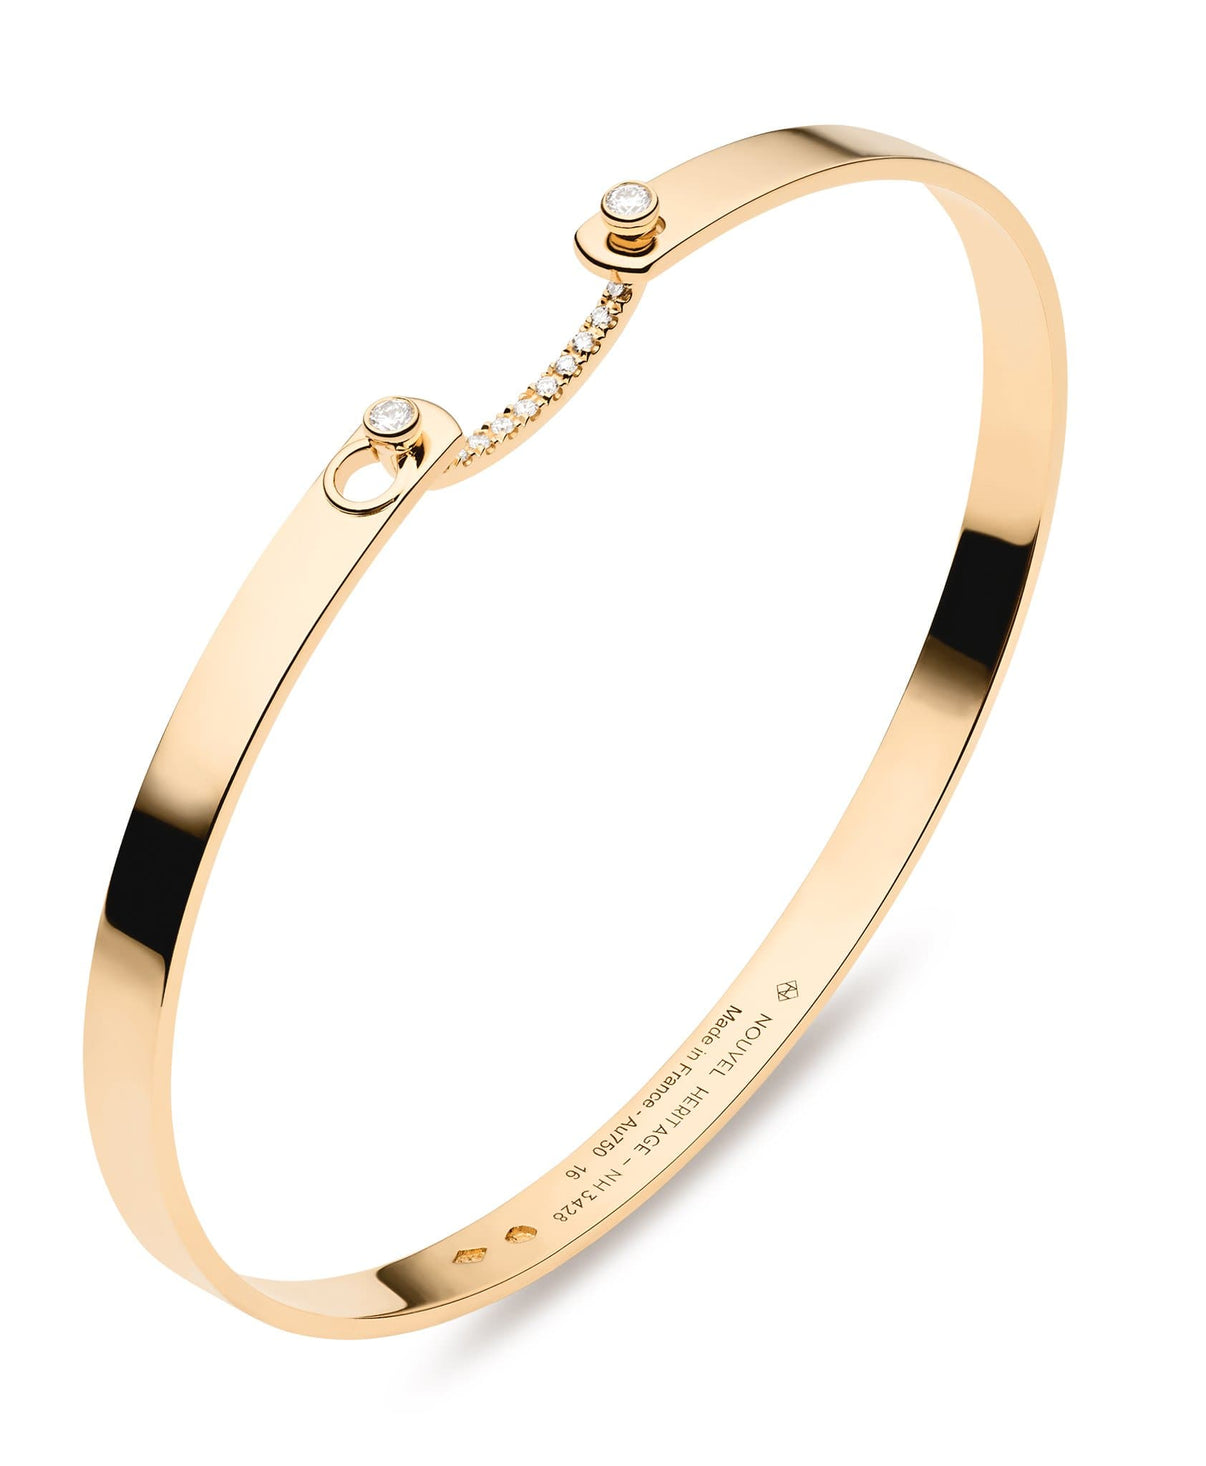 'Business Meeting' Bangle in Yellow Gold